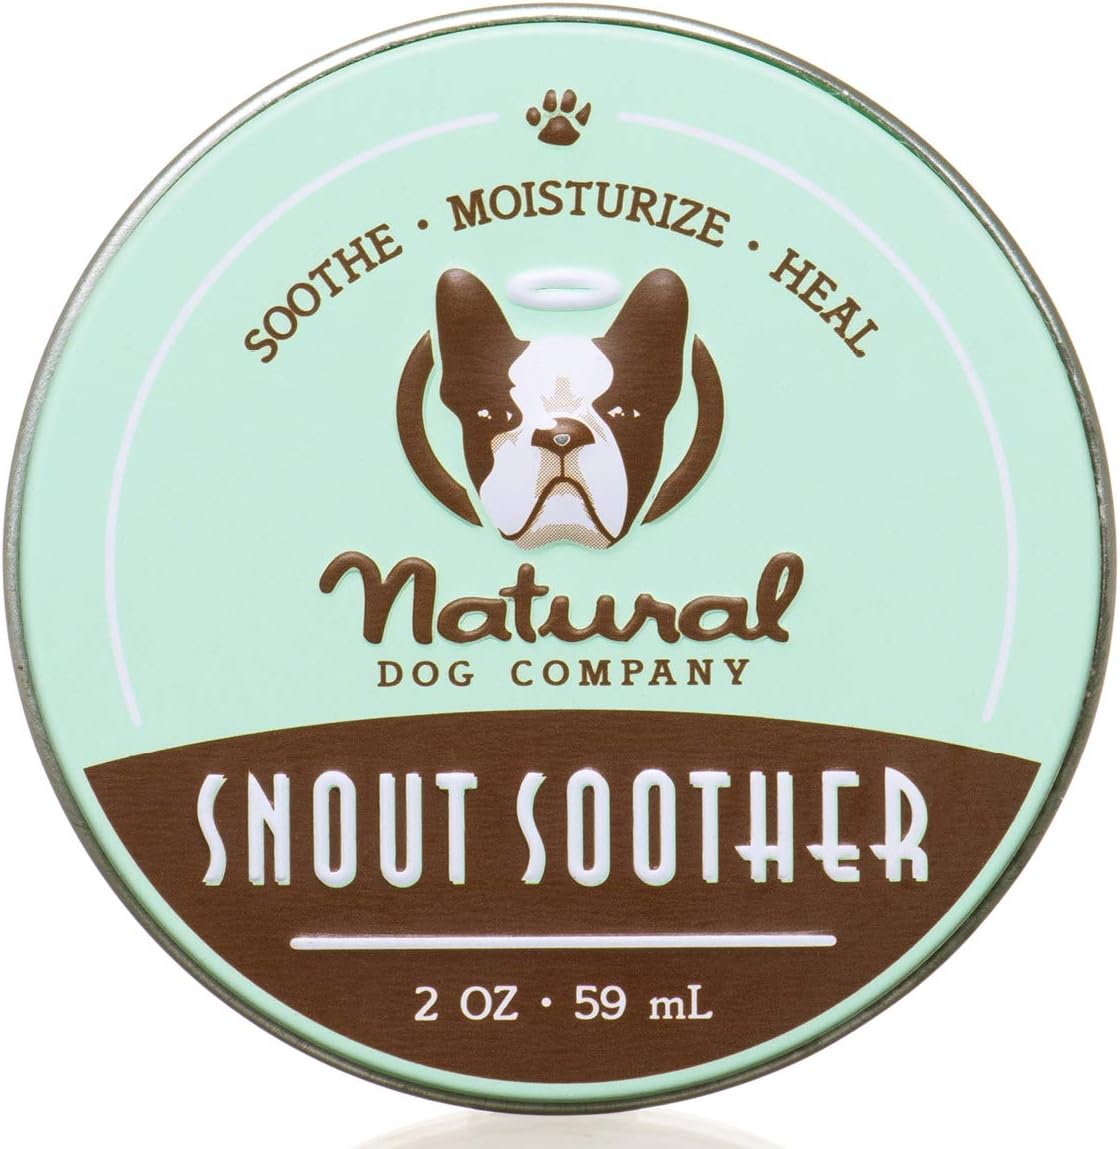 1. Natural Dog Company Snout Soother